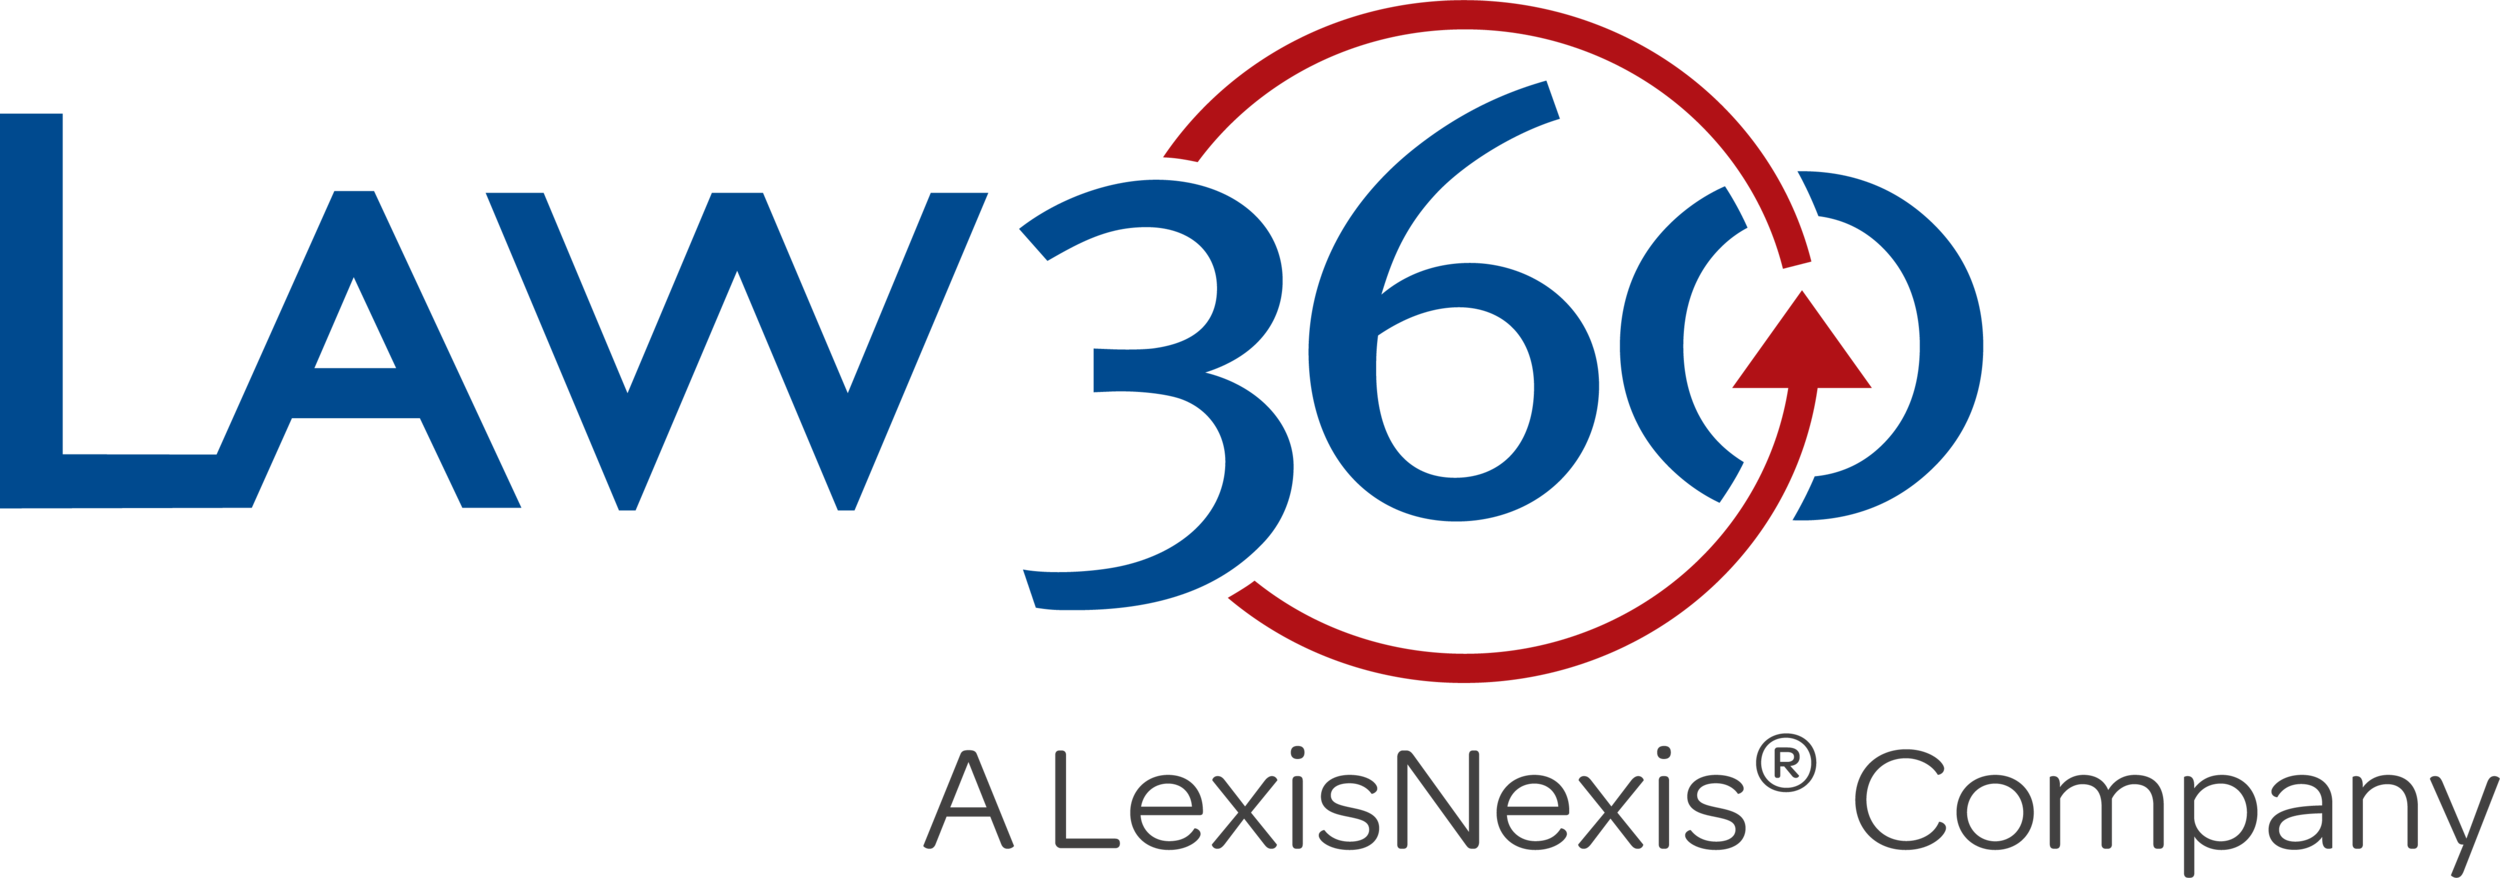 Law360 logo.png